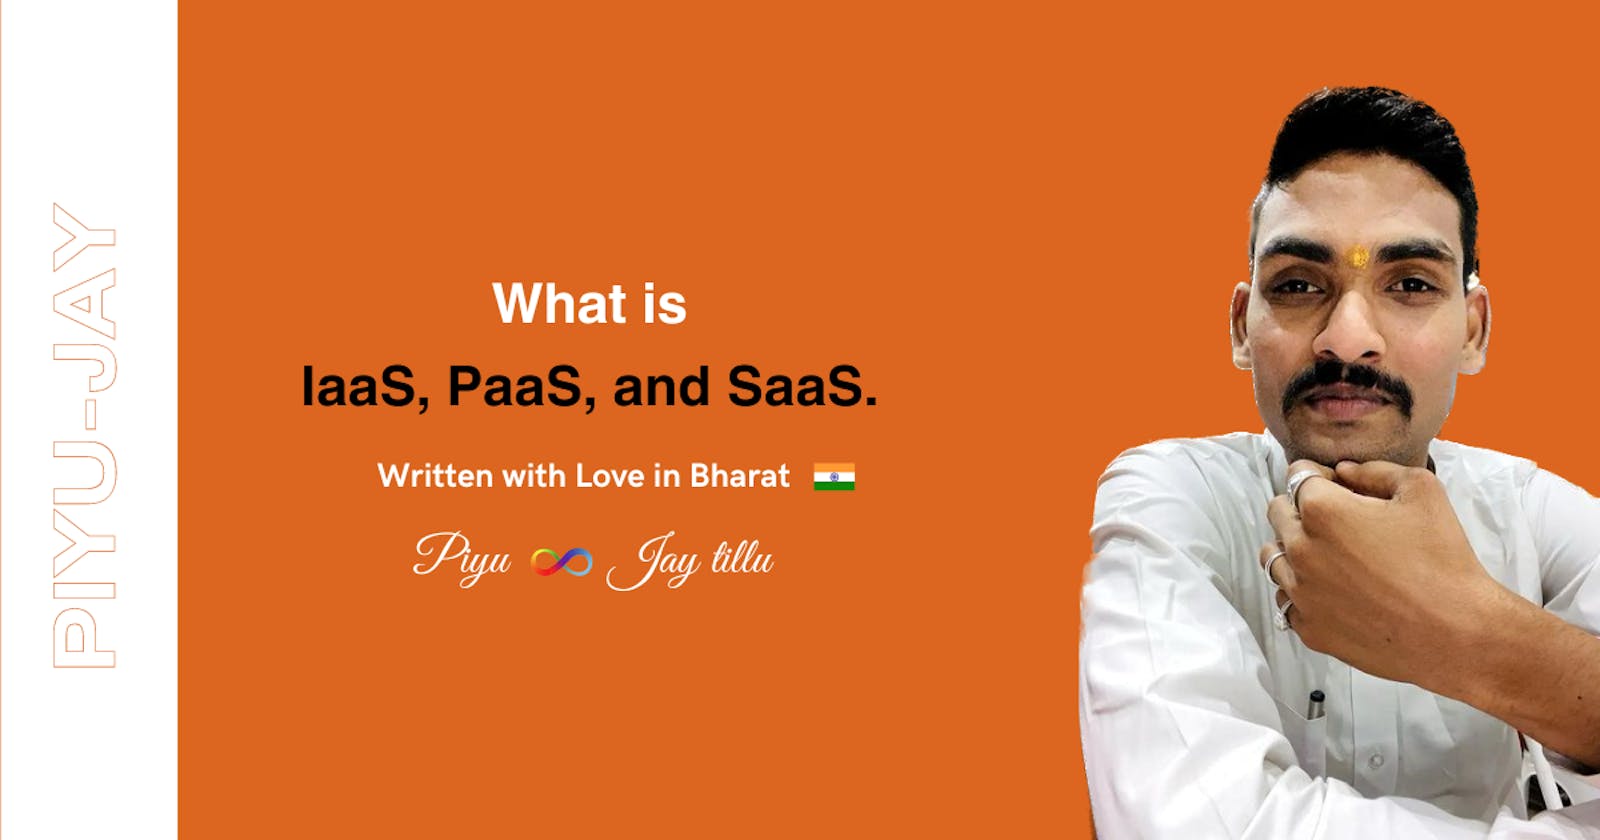 What is IaaS, PaaS, and SaaS. What is the difference between them?